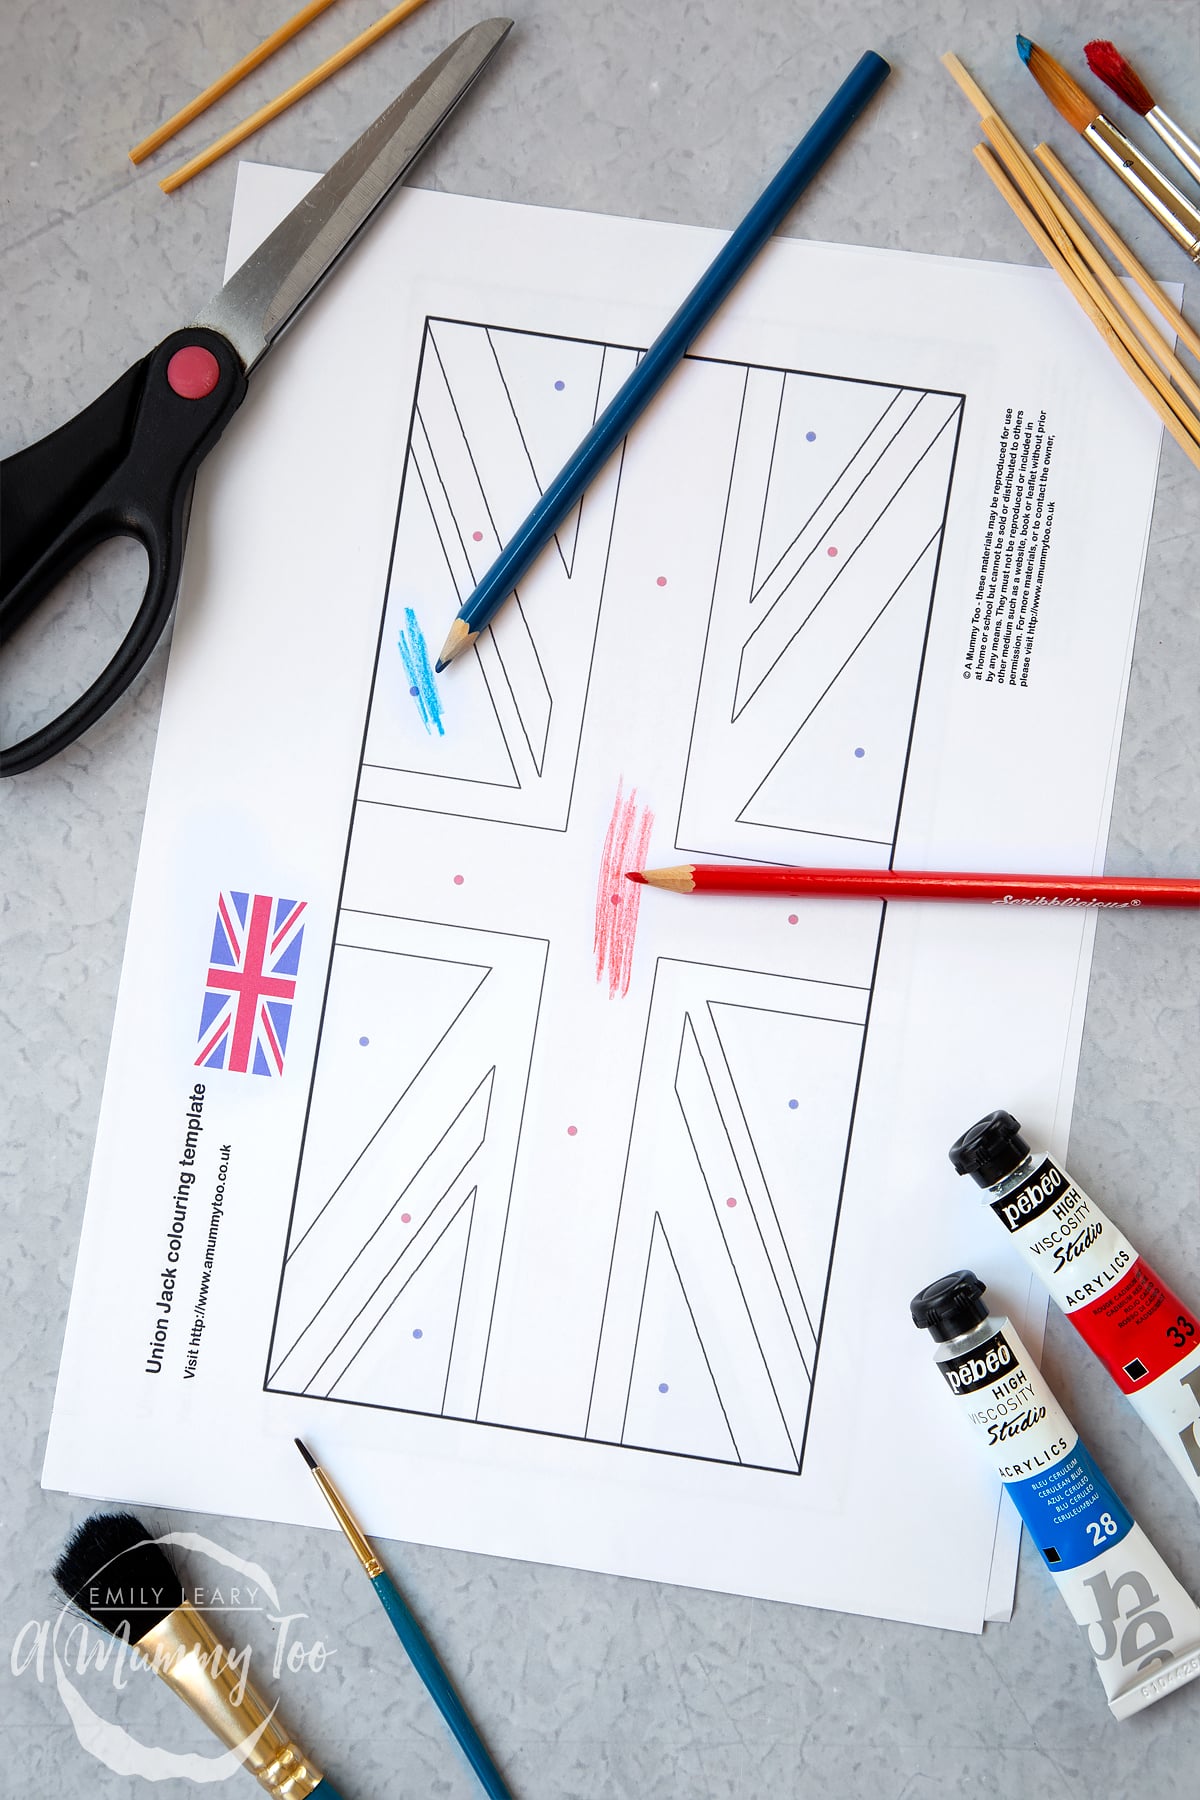 printed Union jack print out with dots to show where the colours are meant to go and colours colouring in the flag.